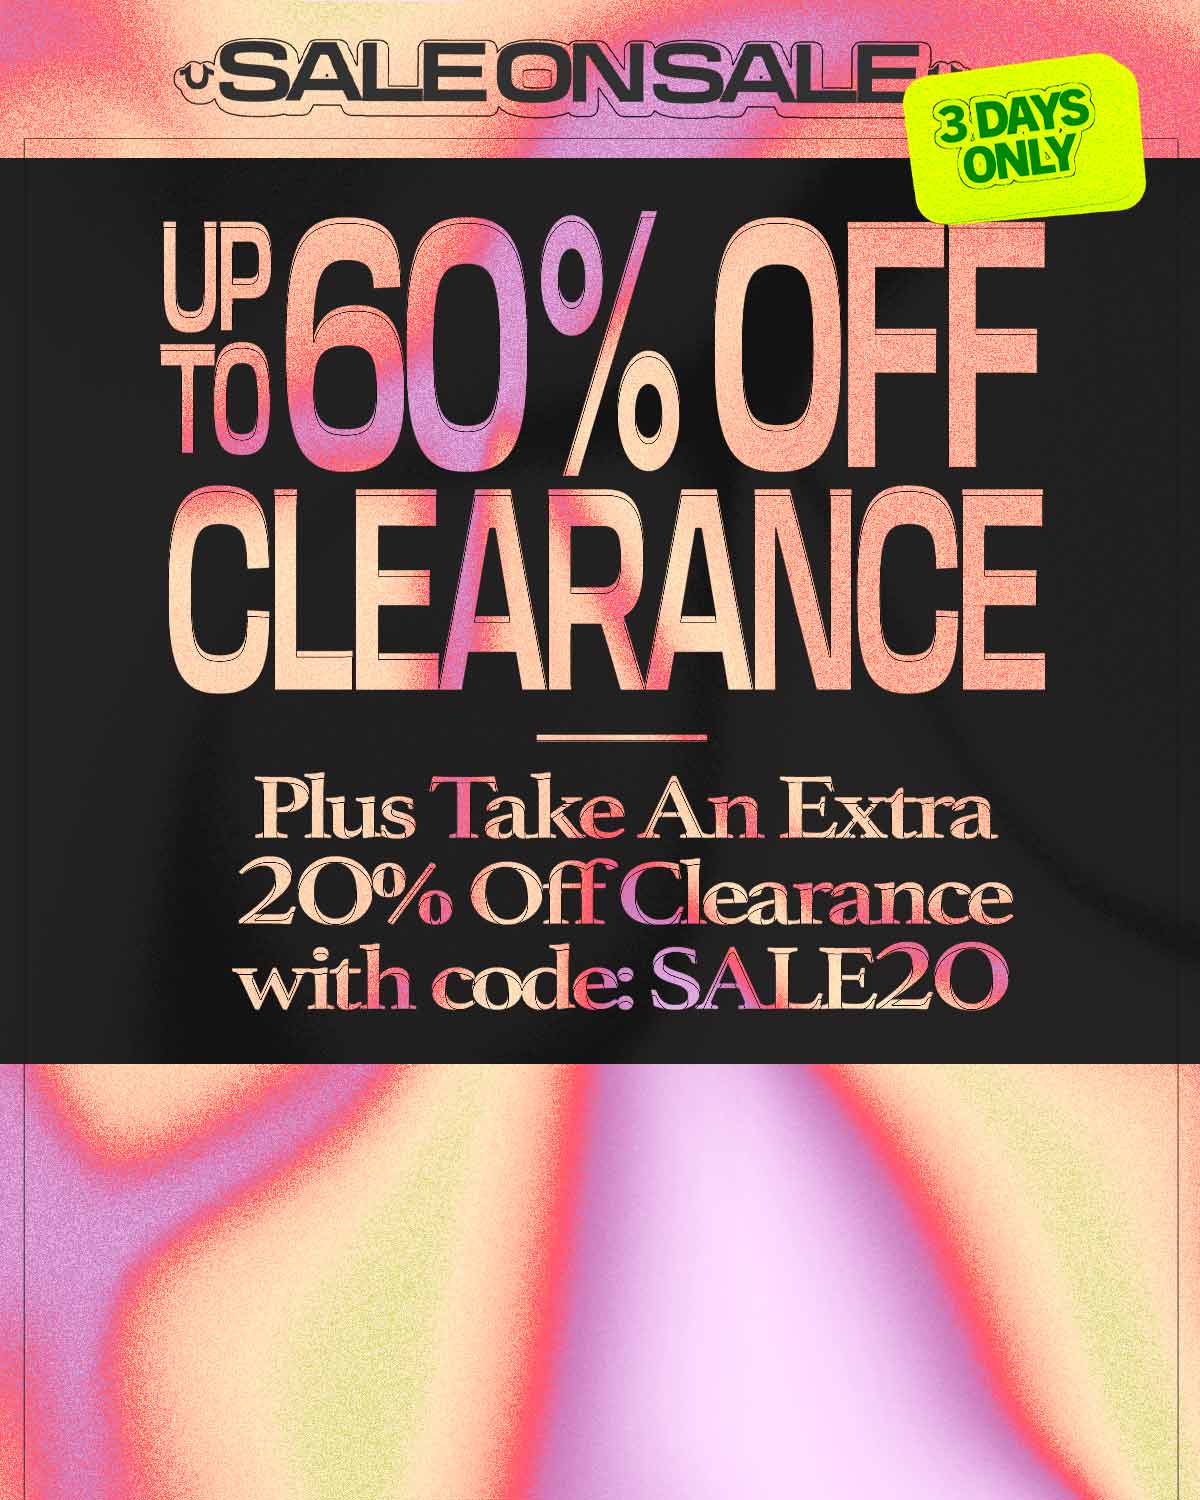 Up to 60% off clearance. Plus take an extra 20% off clearance with code: SALE20